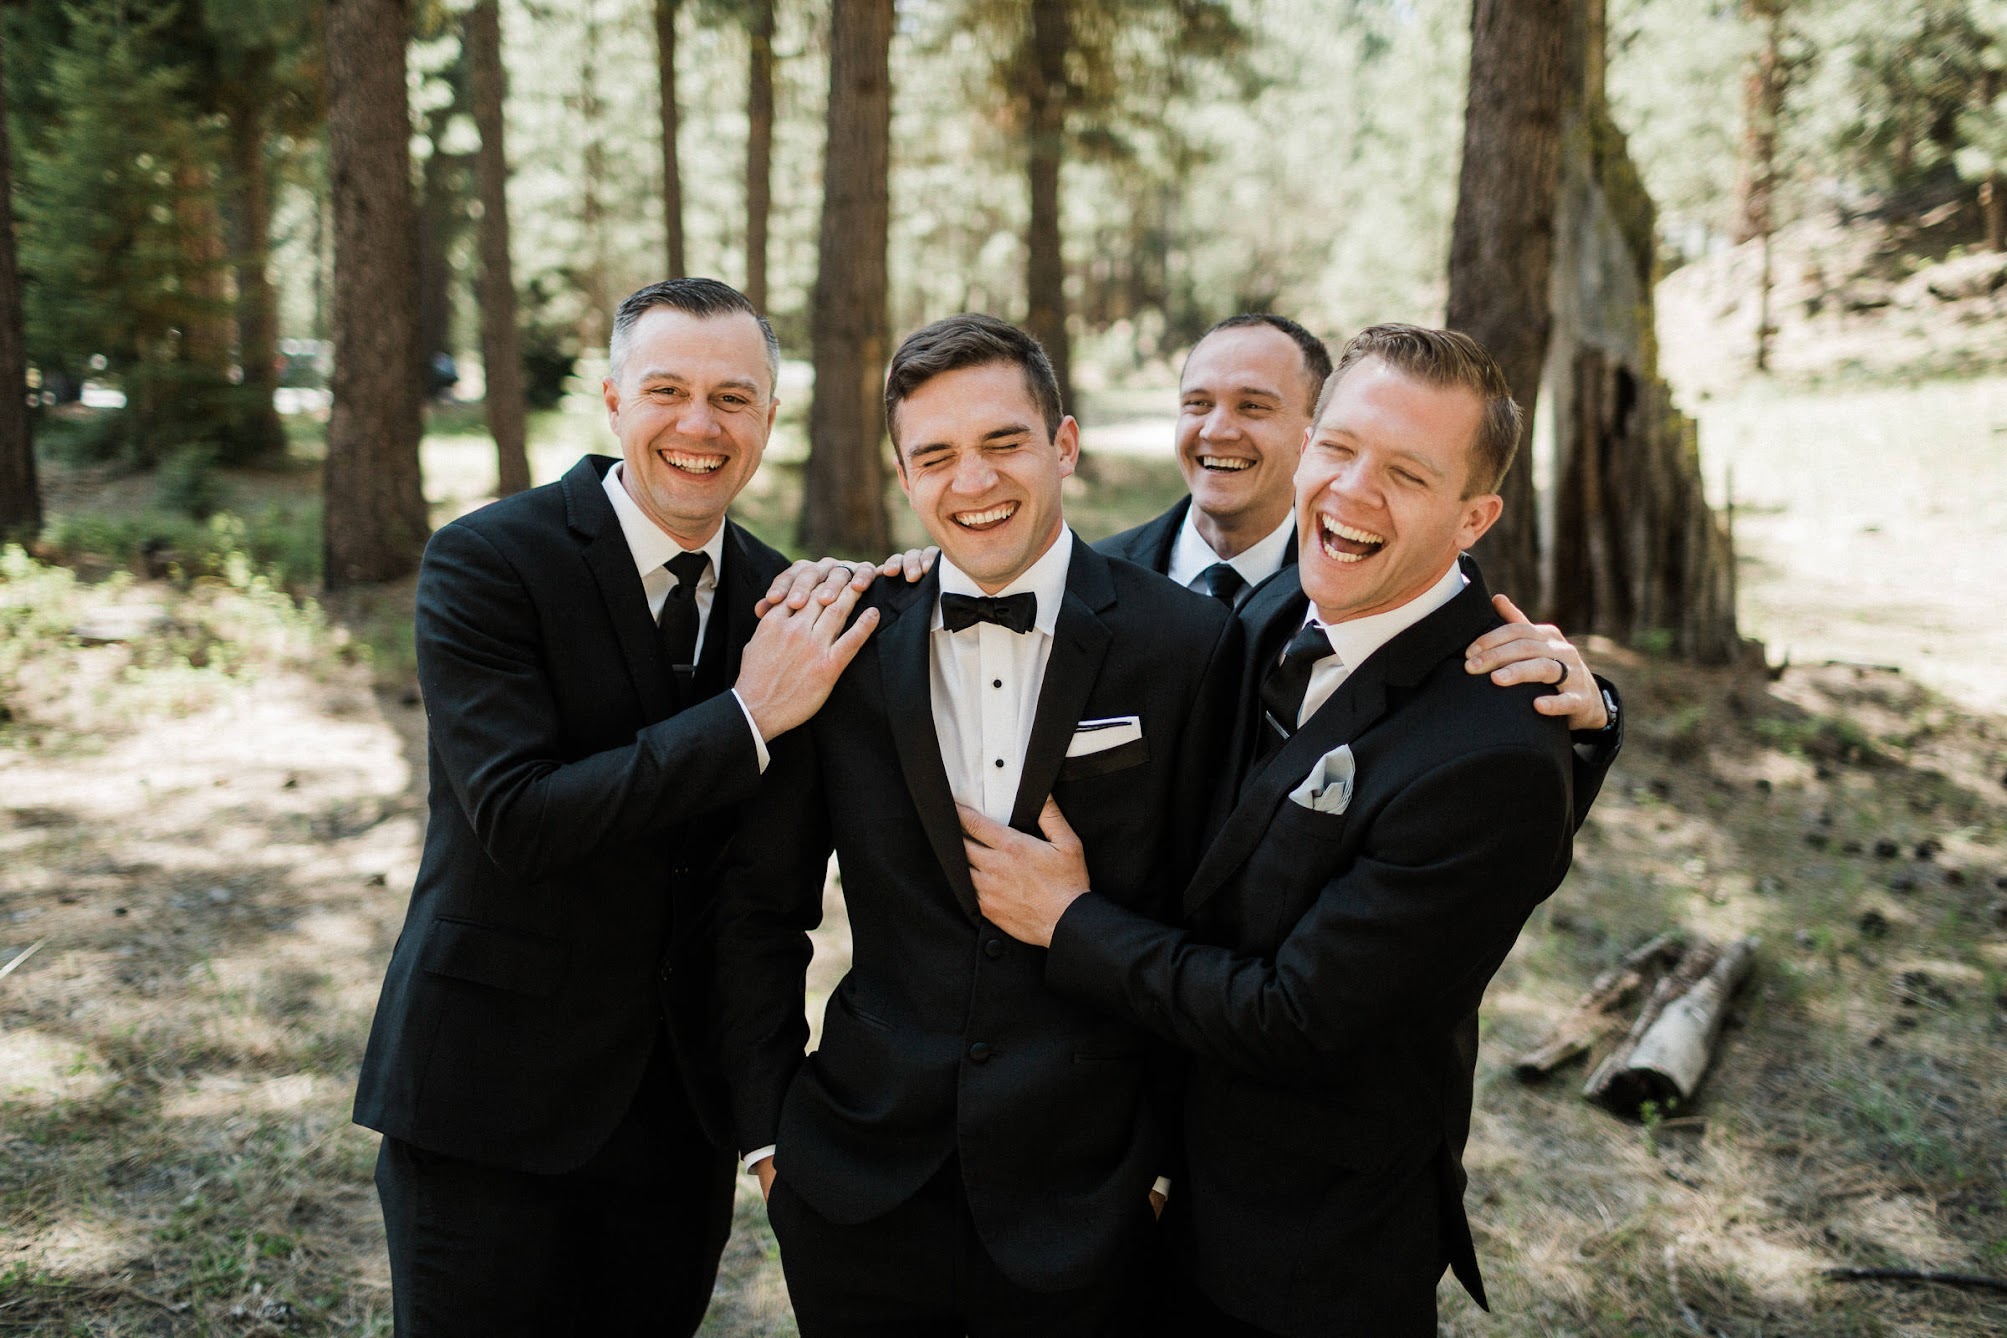 groom and his groomsmen all laughing.